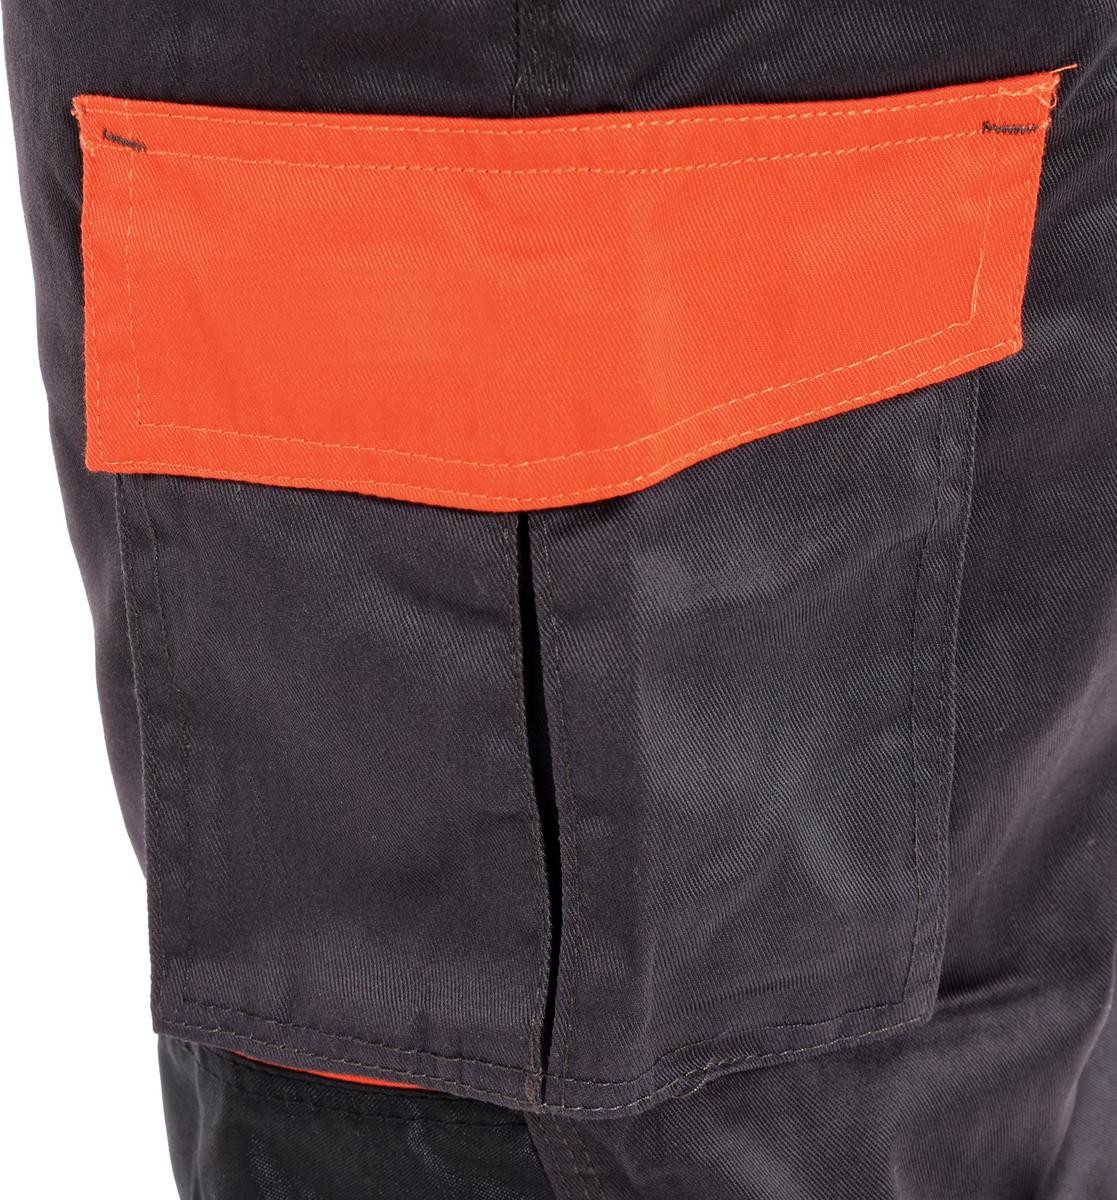 OEM-quality YATO YT-80909 Work Trousers